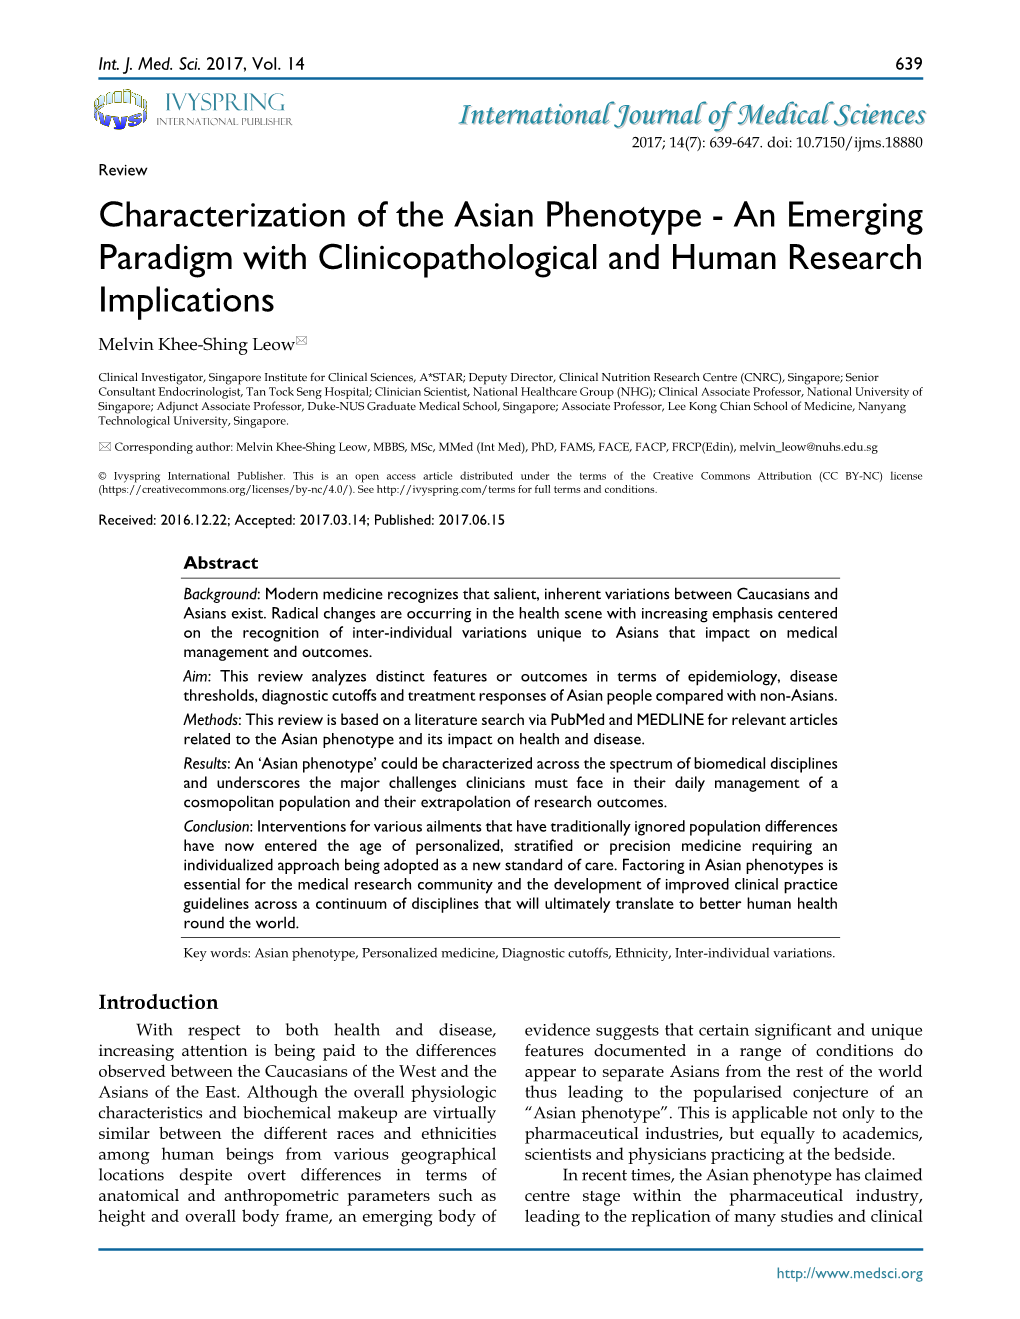 Characterization of the Asian Phenotype - an Emerging Paradigm with Clinicopathological and Human Research Implications Melvin Khee-Shing Leow